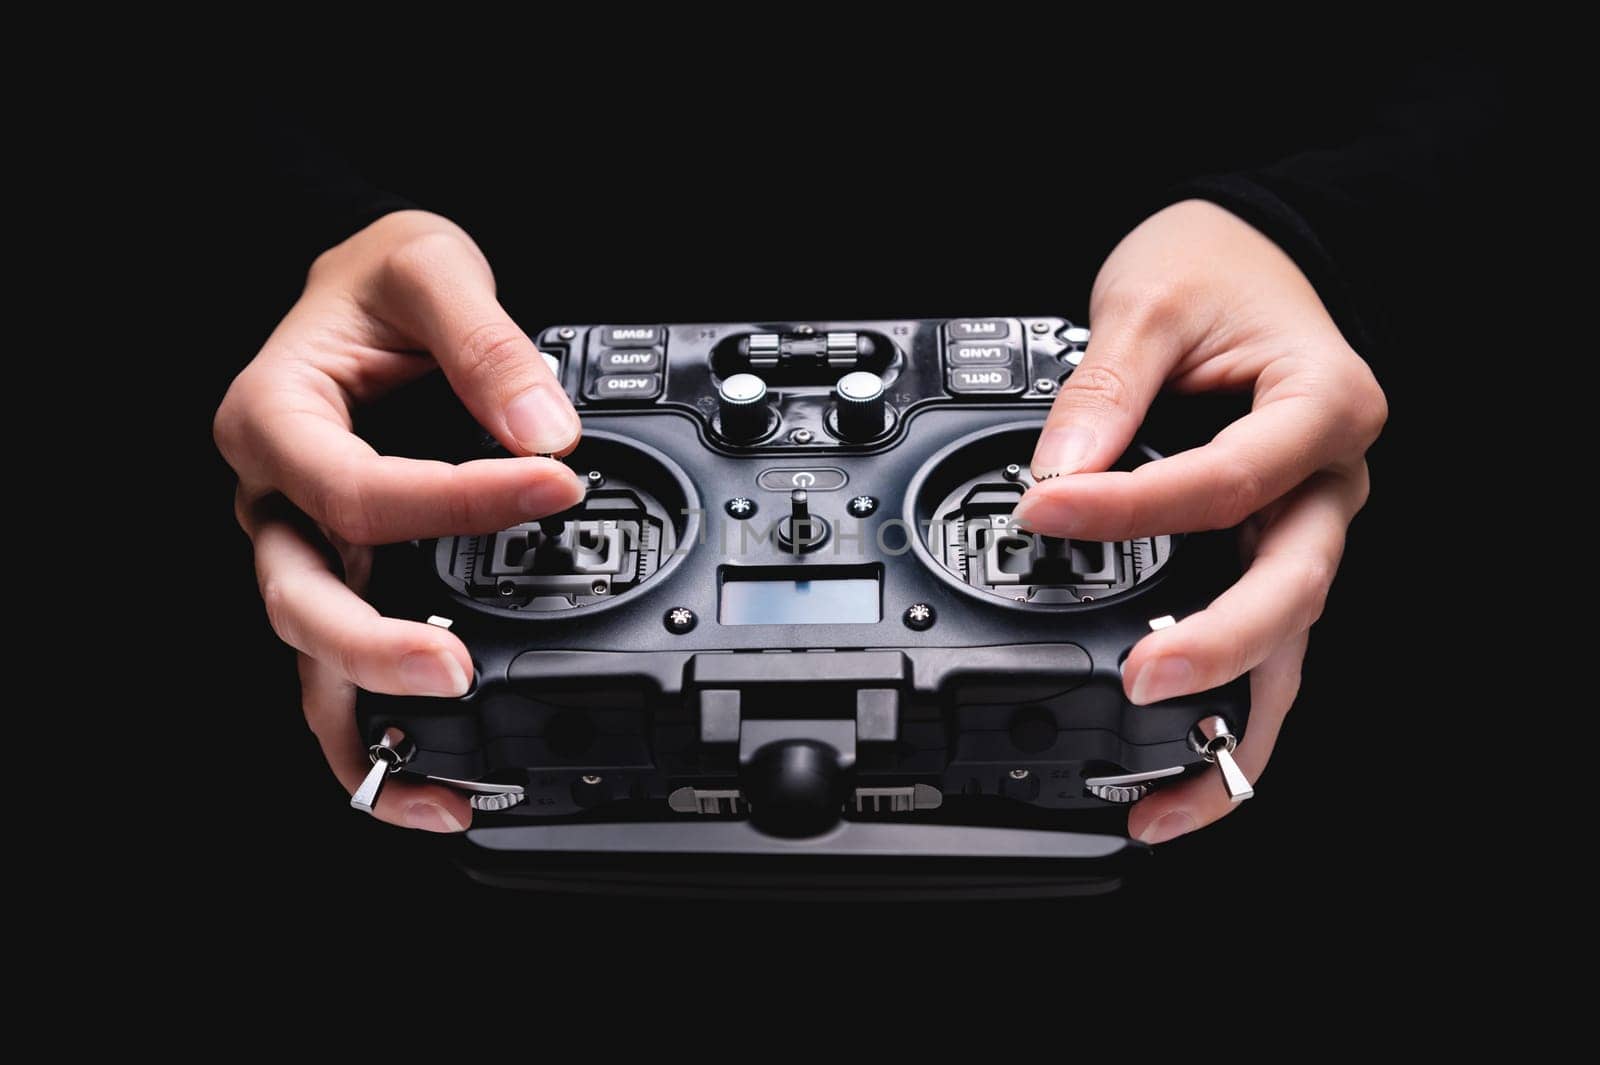 Remote control of FPV racing drone on black background in female hands, close-up by yanik88